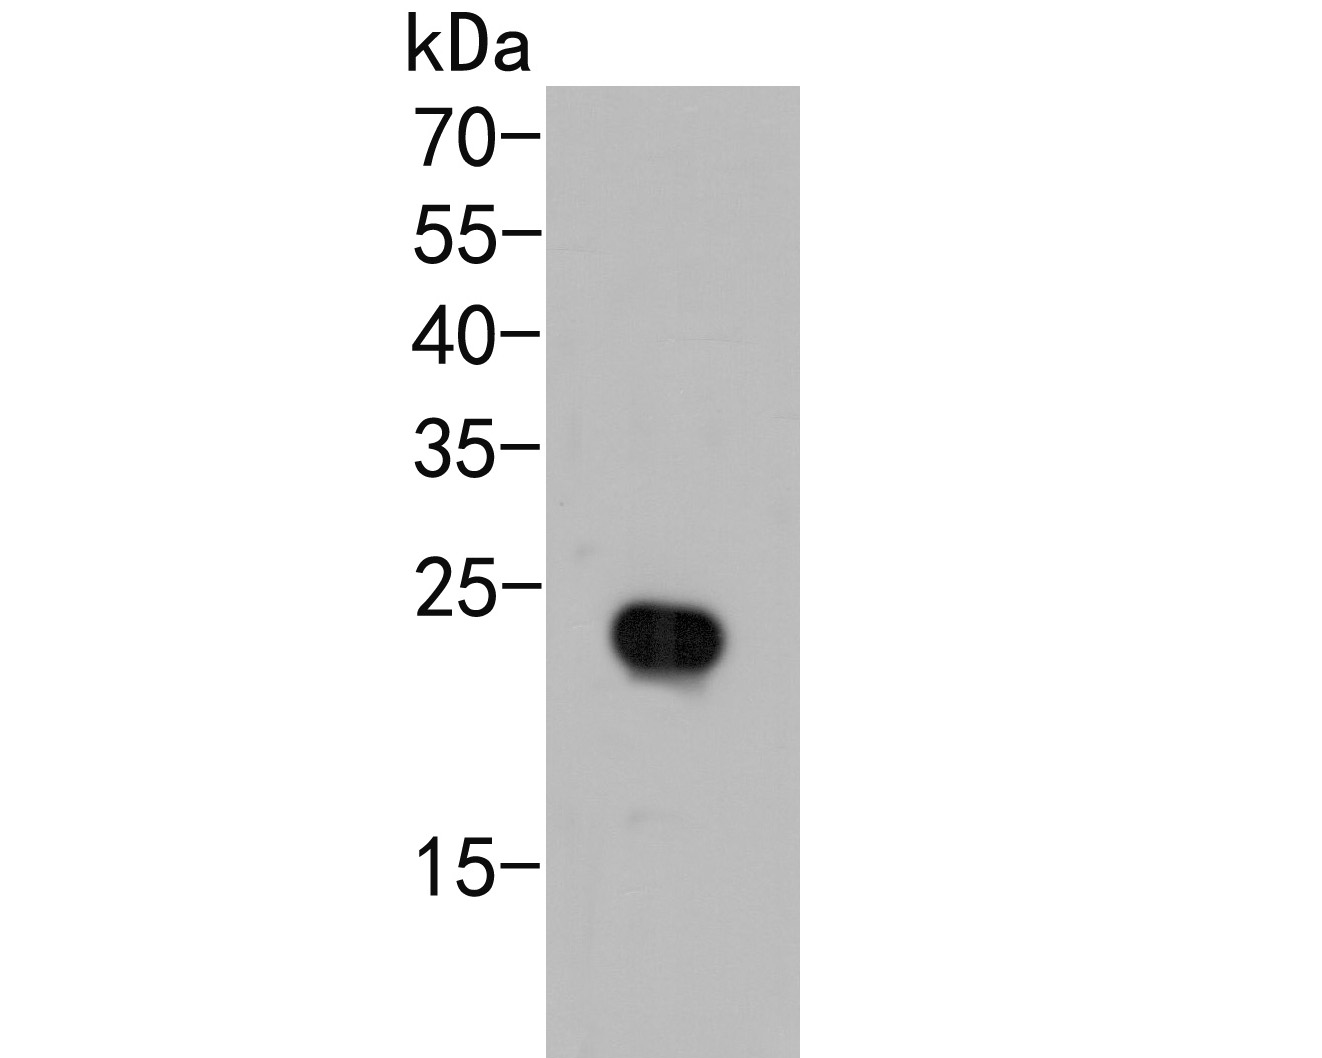 Western blot analysis of AP repeat on recombinant protein lysate. Proteins were transferred to a PVDF membrane and blocked with 5% BSA in PBS for 1 hour at room temperature. The primary antibody (HA500112, 1/500) was used in 5% BSA at room temperature for 2 hours. Goat Anti-Rabbit IgG - HRP Secondary Antibody (HA1001) at 1:5,000 dilution was used for 1 hour at room temperature.